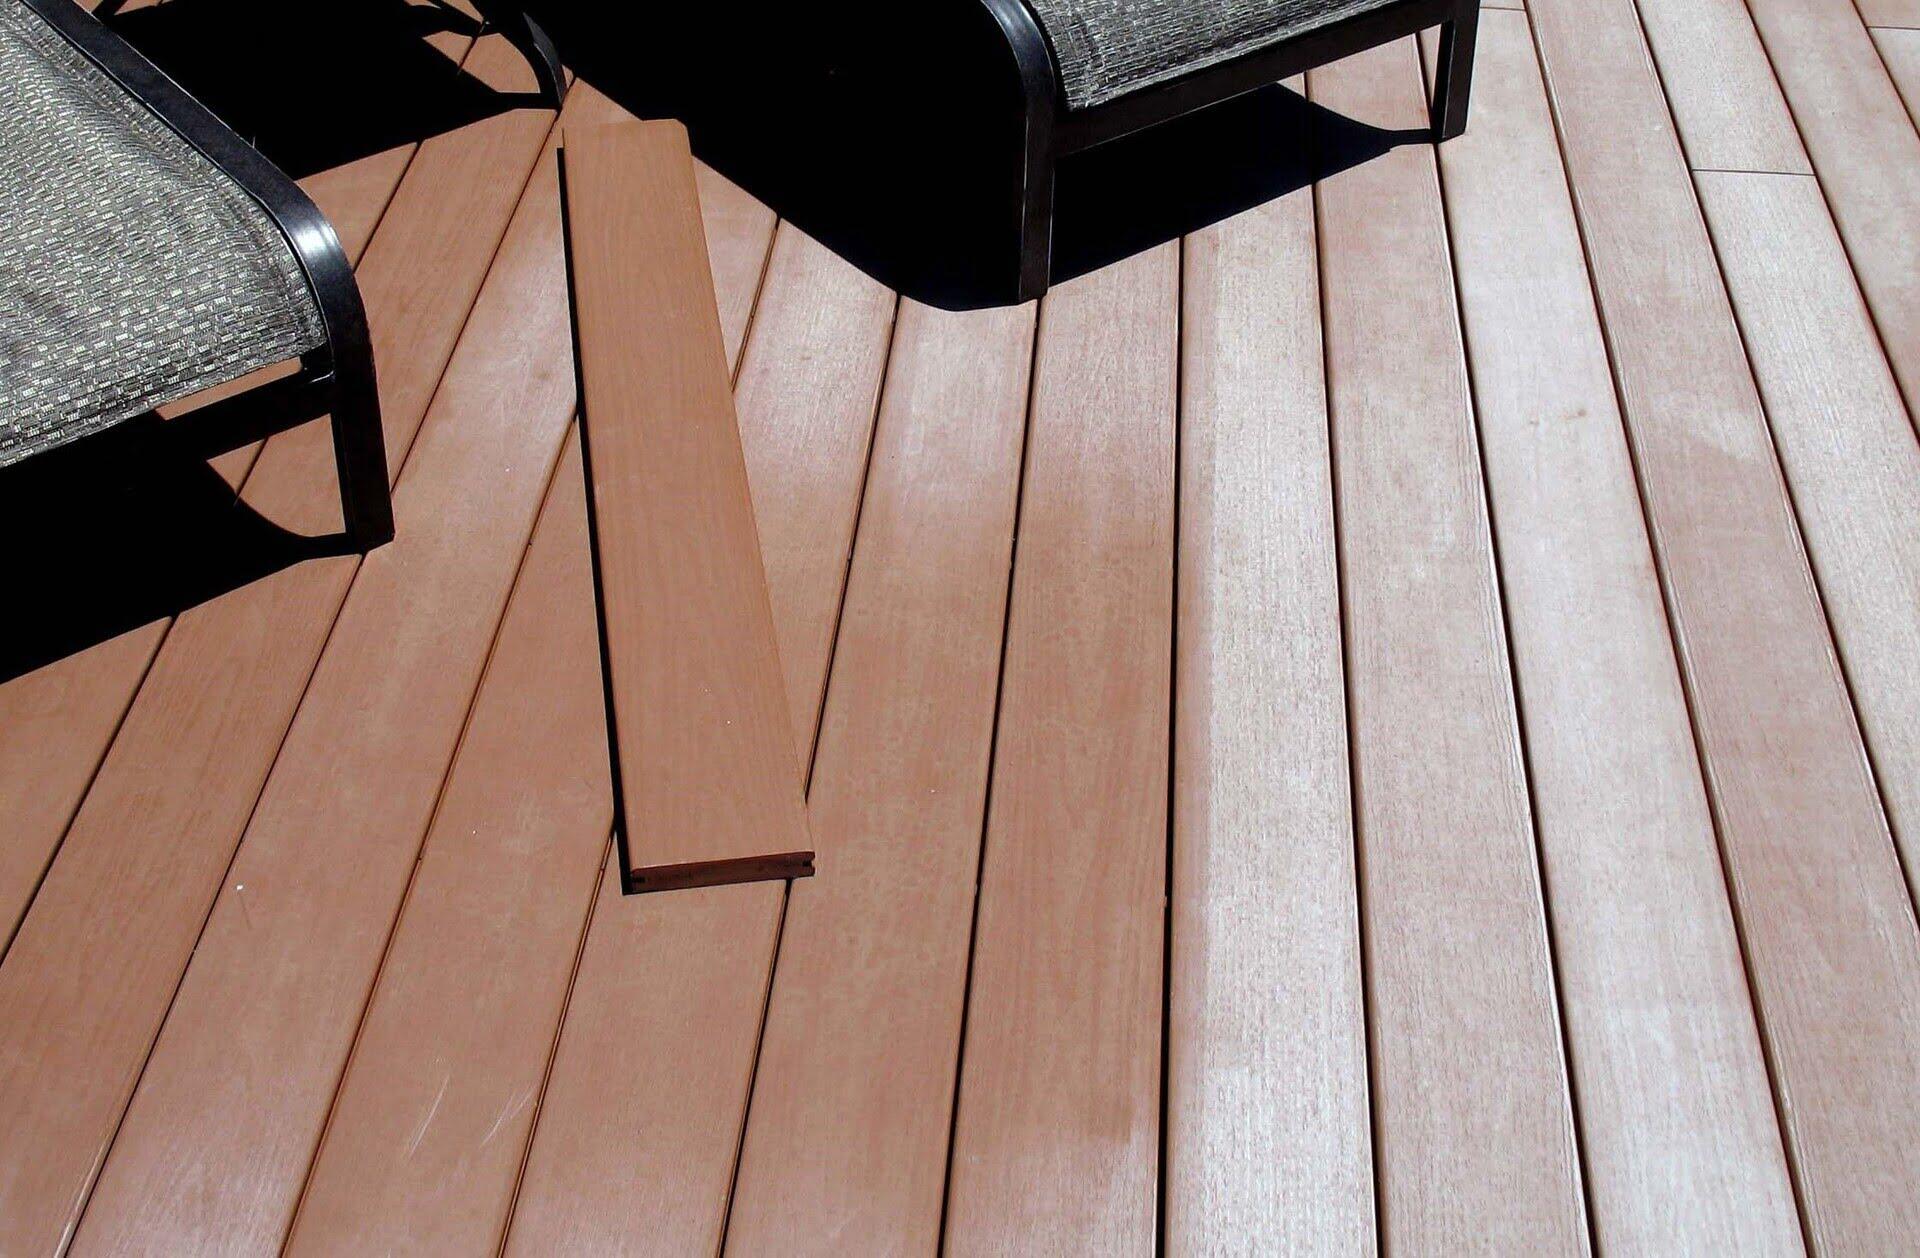 What Are The Problems With Composite Decking?